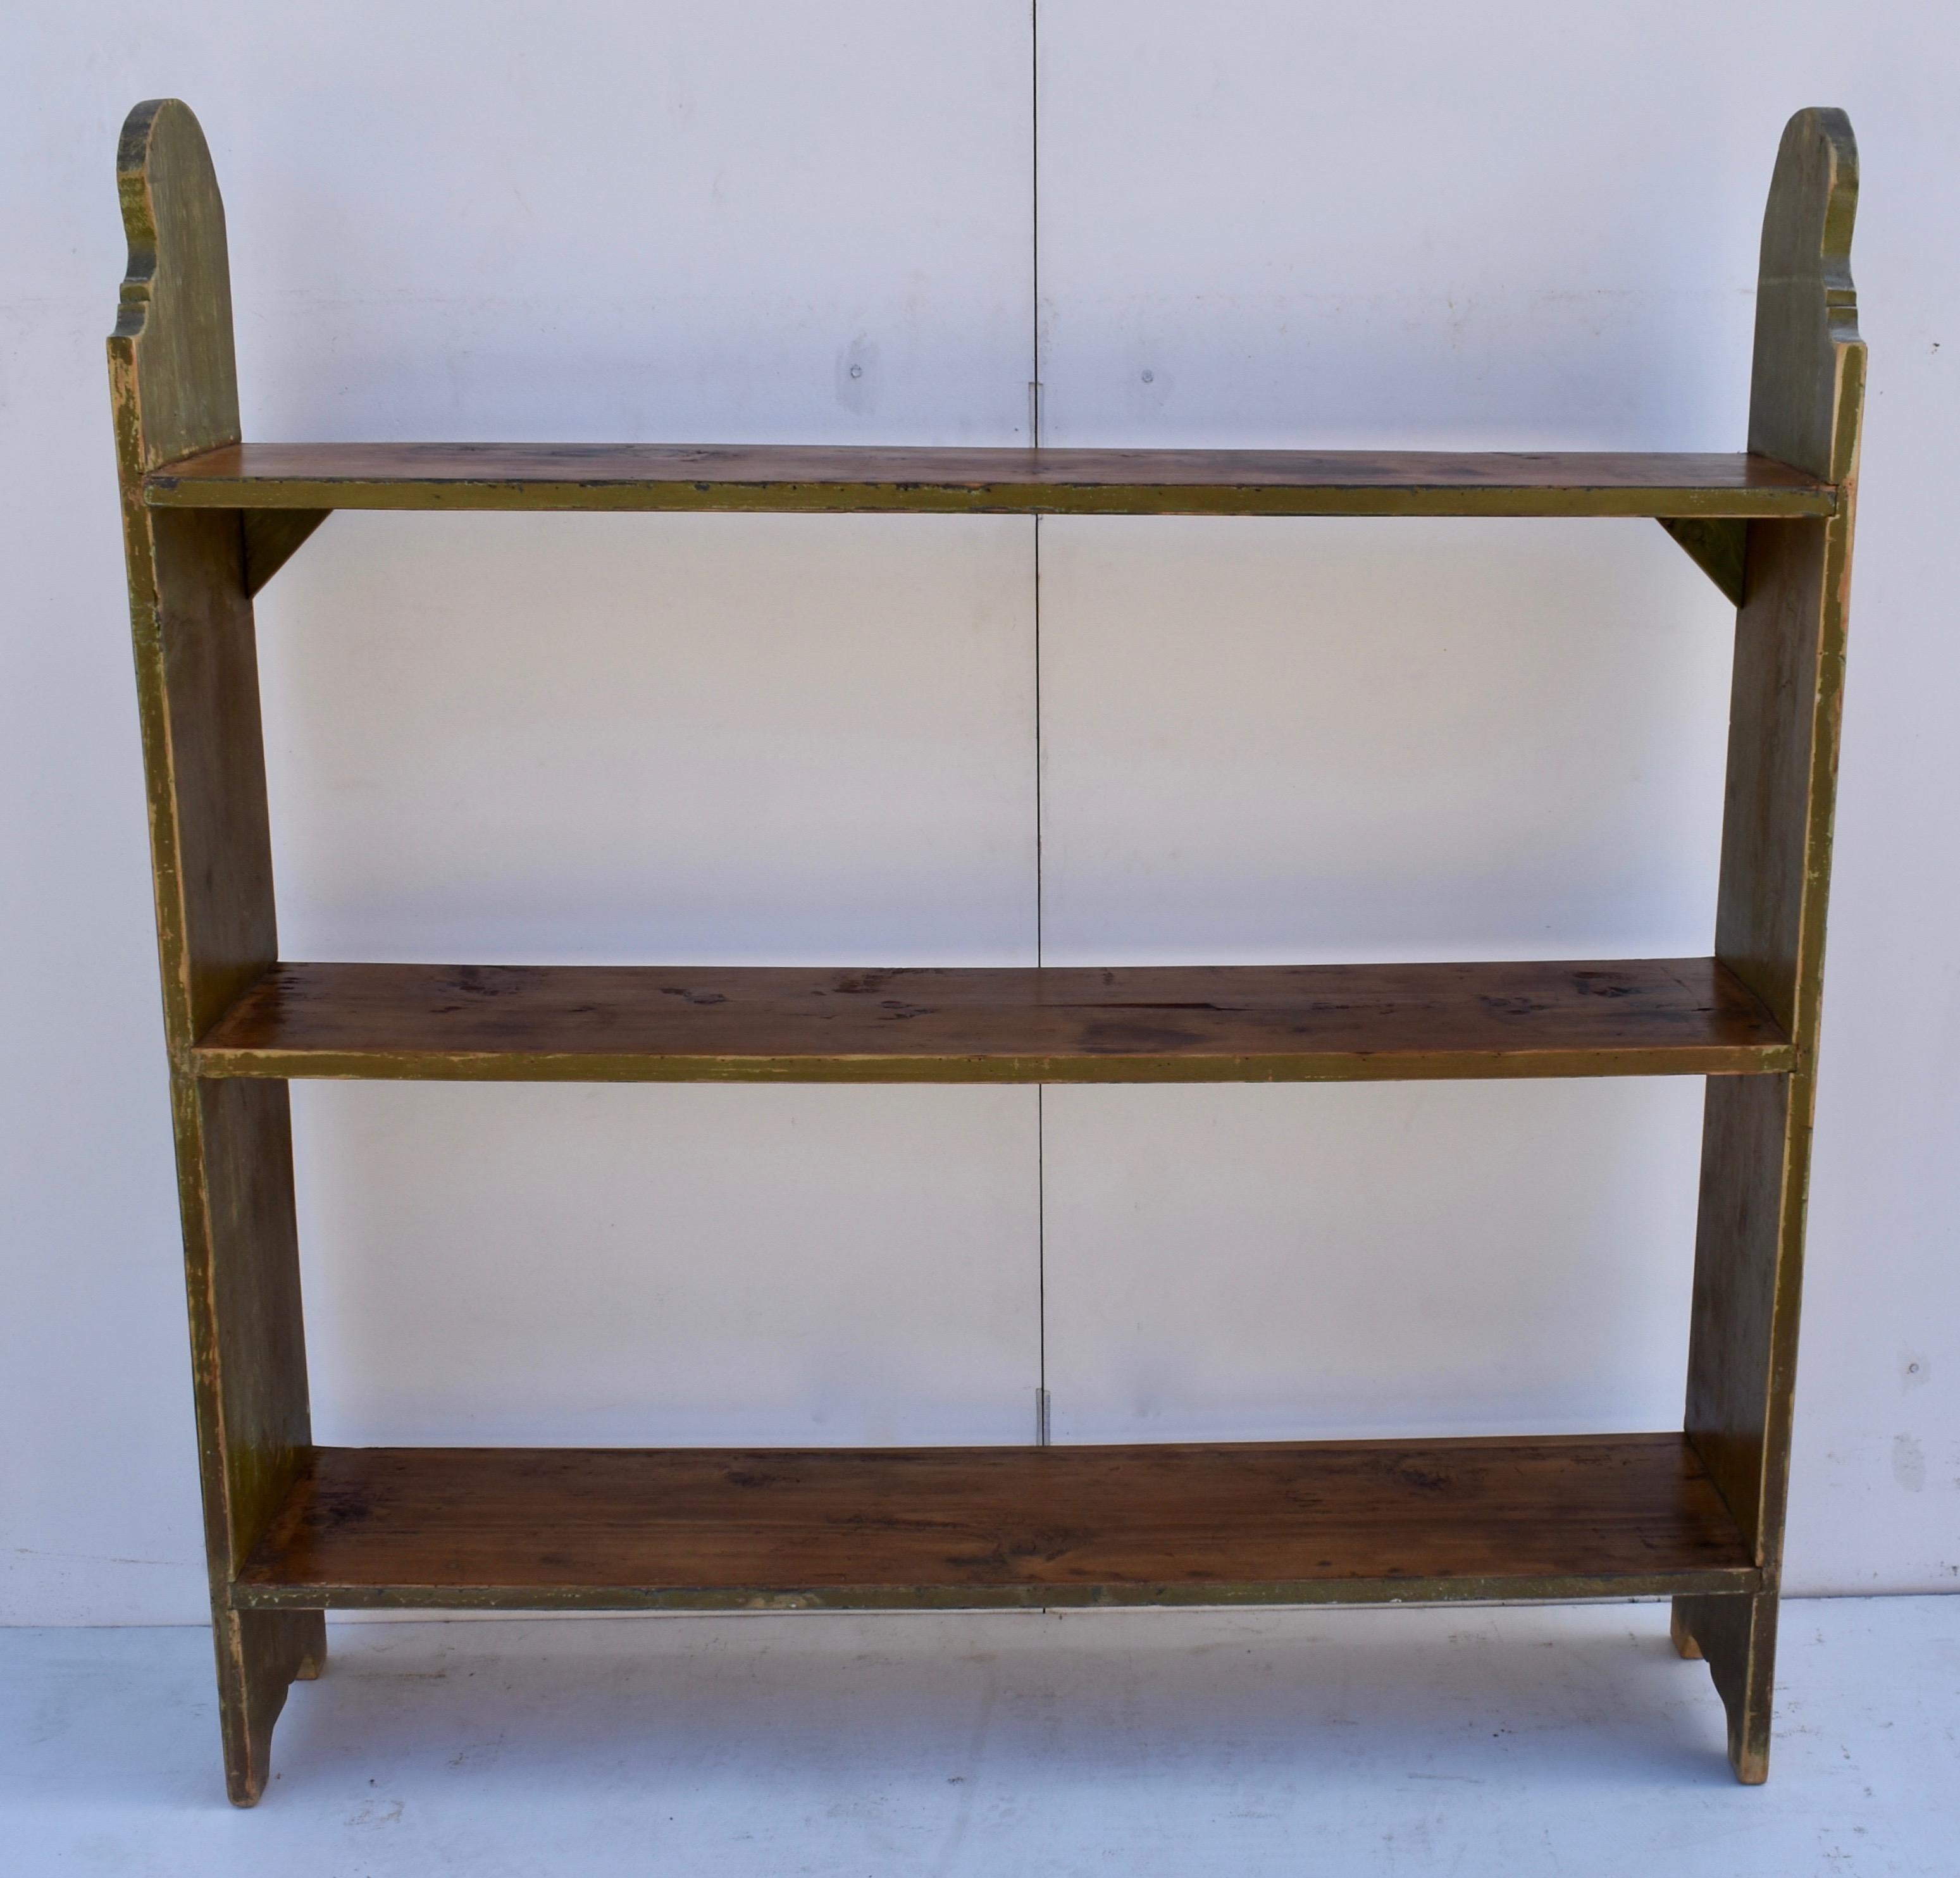 This useful five board shelf unit was designed to hold pots and pans, buckets, and other large vessels both empty and full. It needed sturdy construction so the top and bottom shelves are tenoned all the way through the sides and the middle shelf is